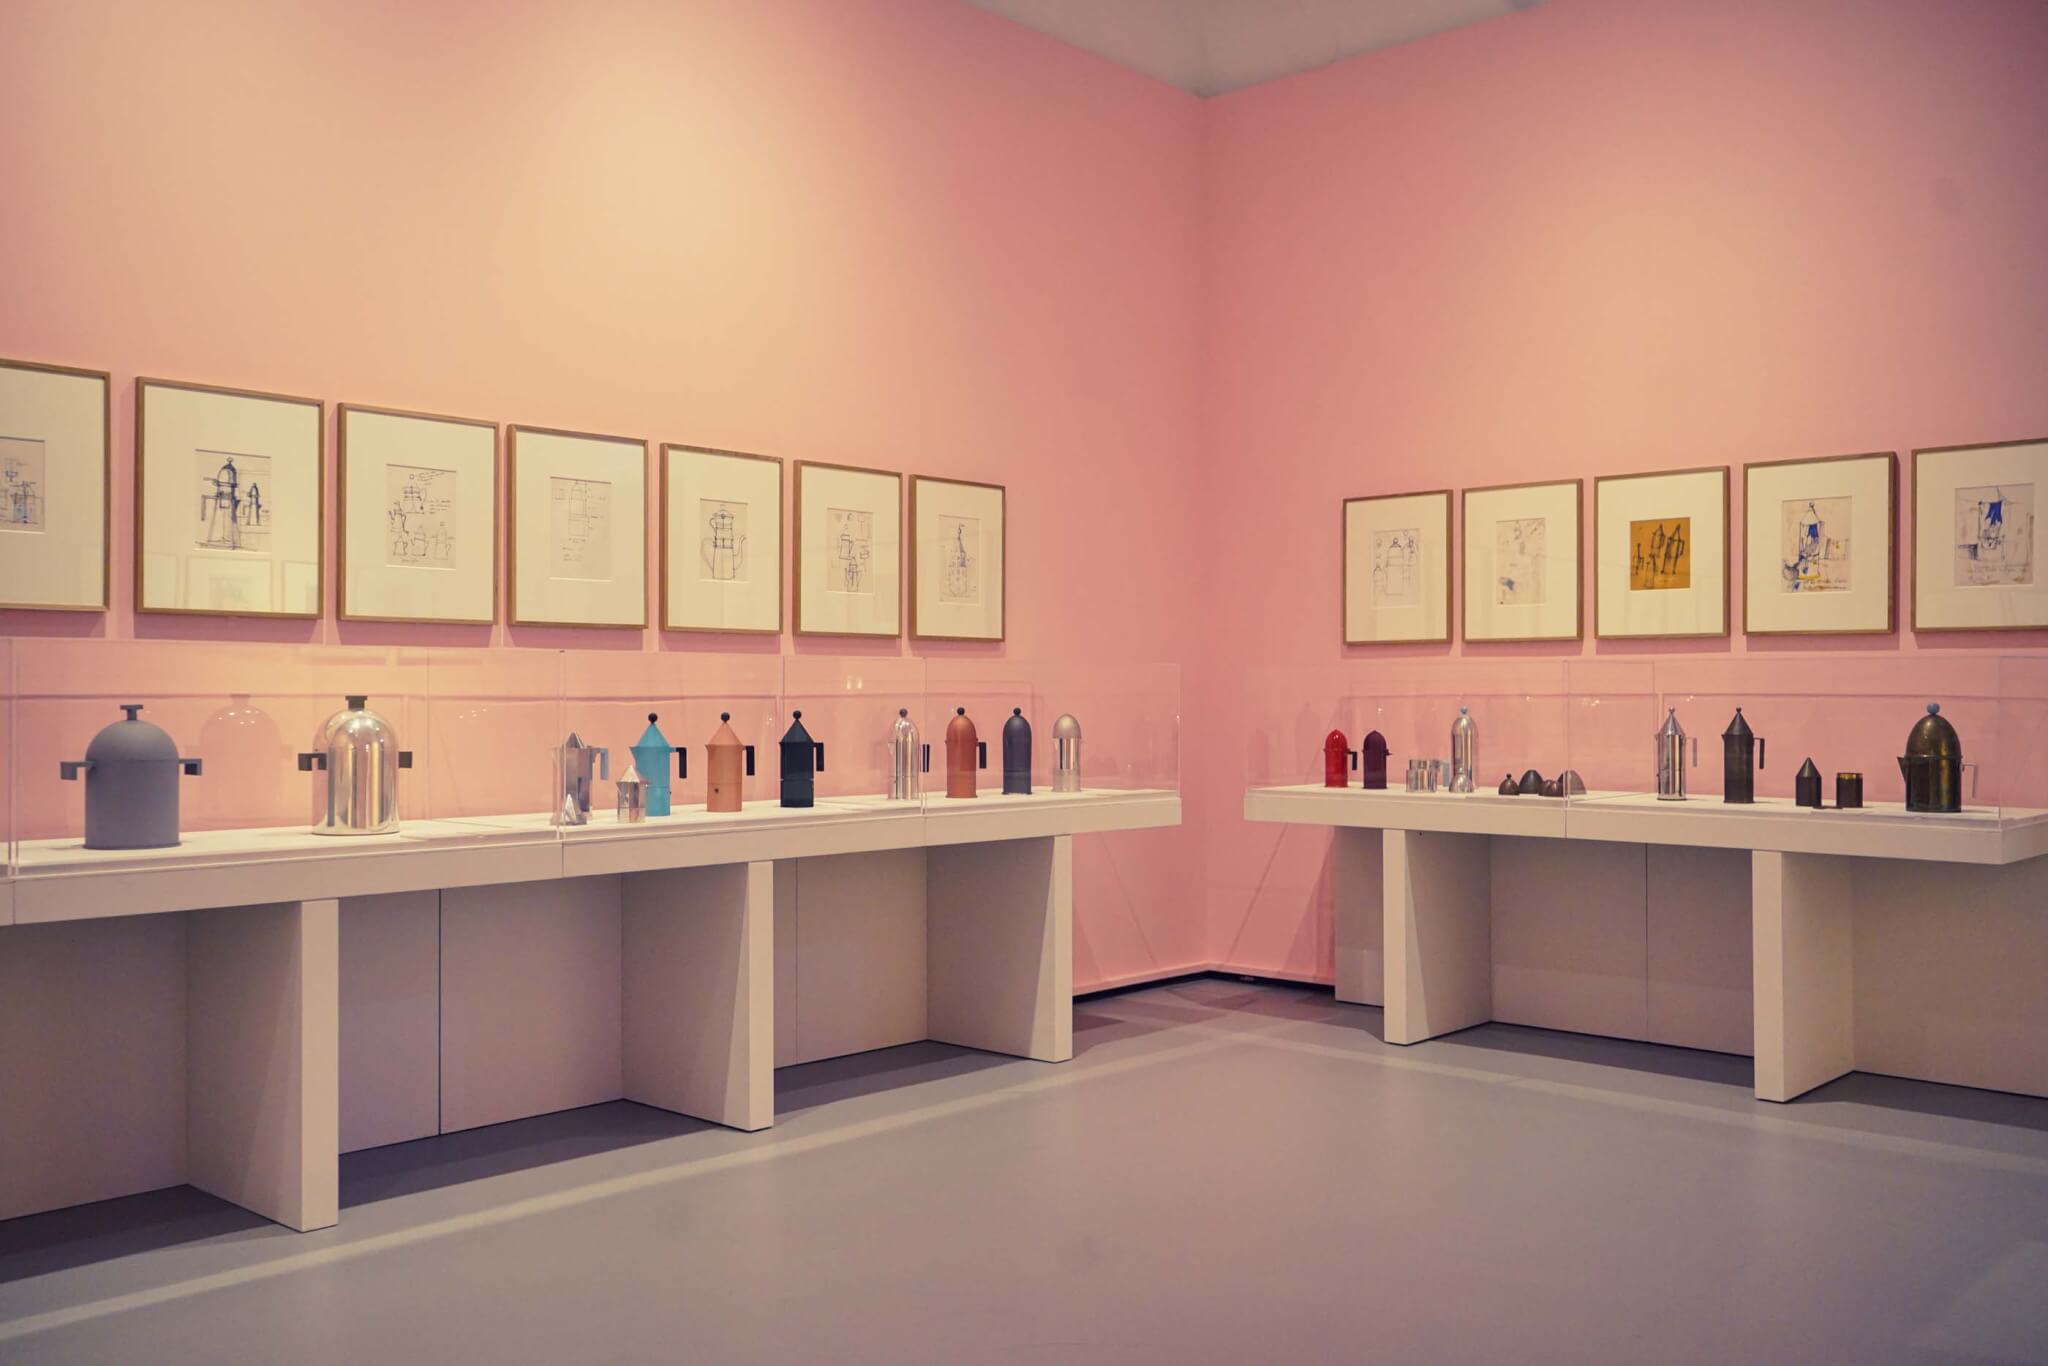 sketches line pink walls and coffee pot objects line shelves